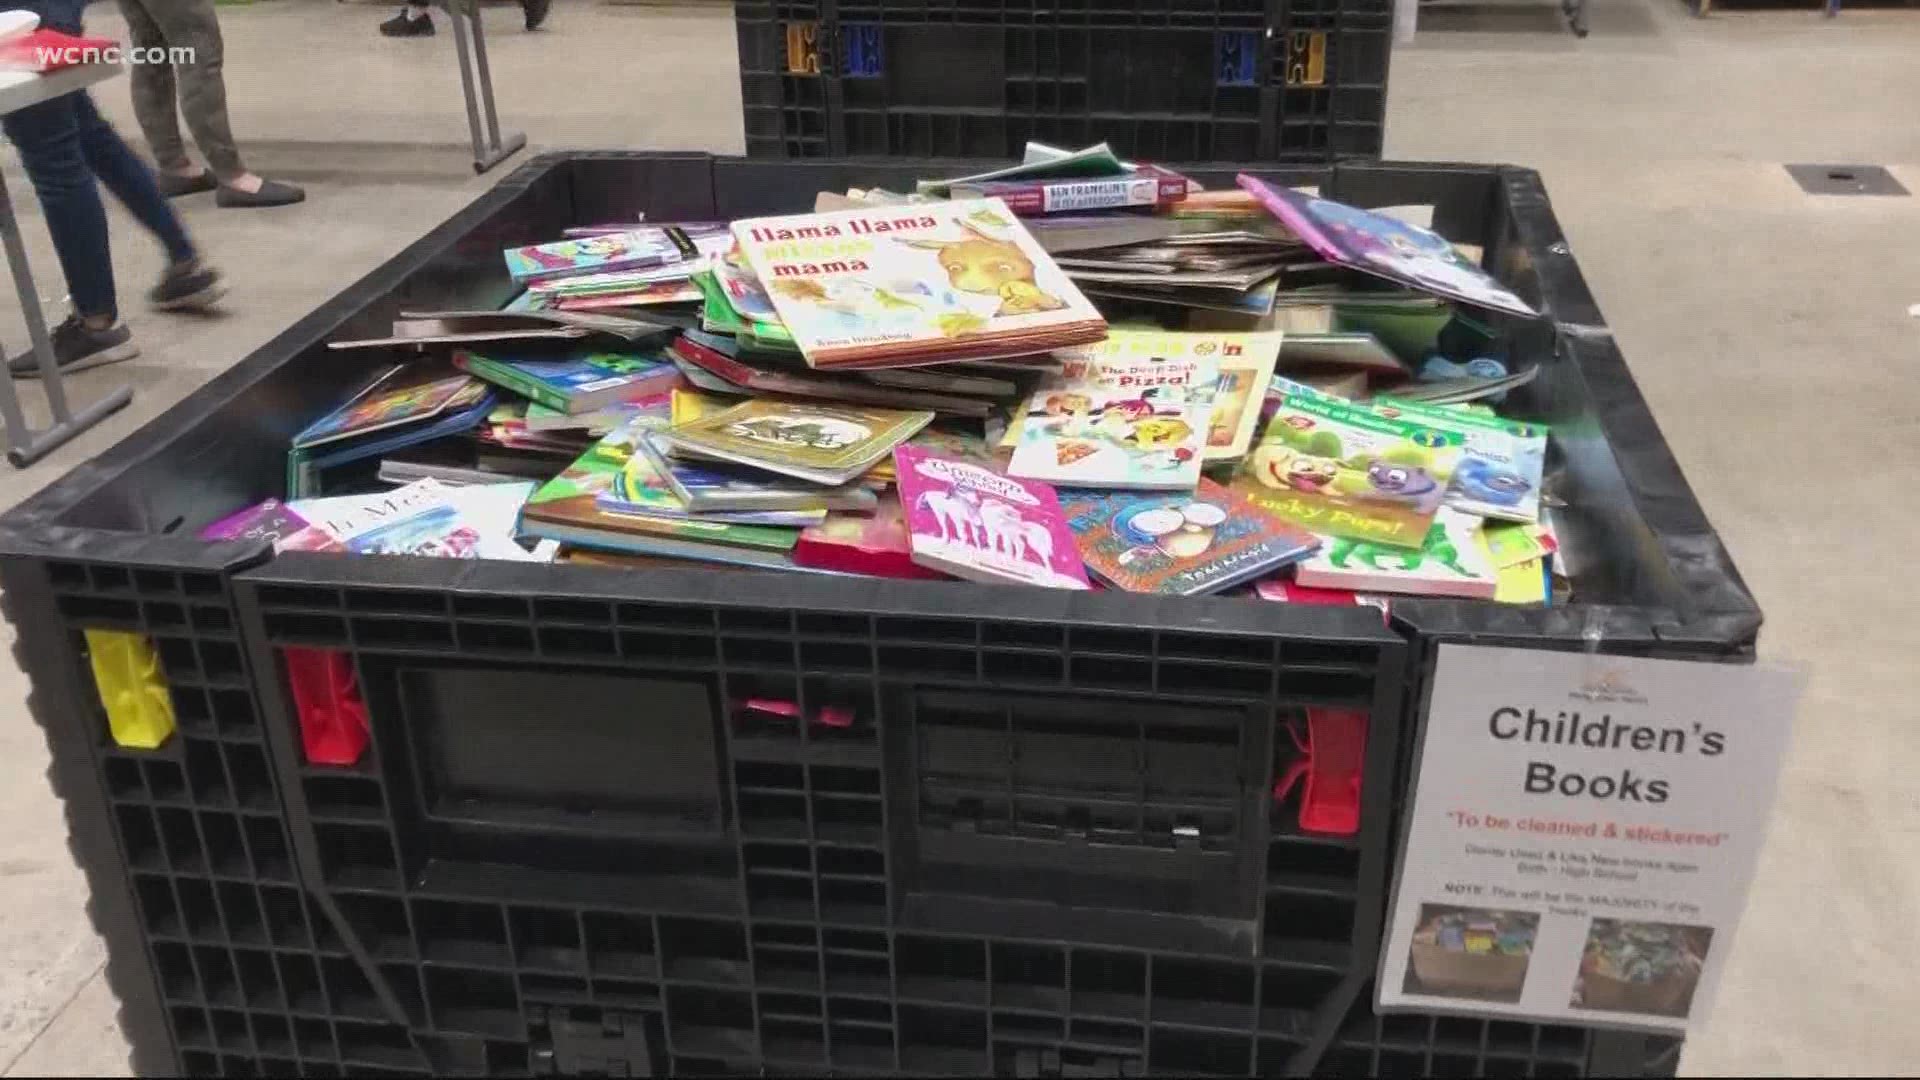 One of the biggest challenges facing kids out of school has been keeping up with their reading. One small team of people has found a way to make a big difference.